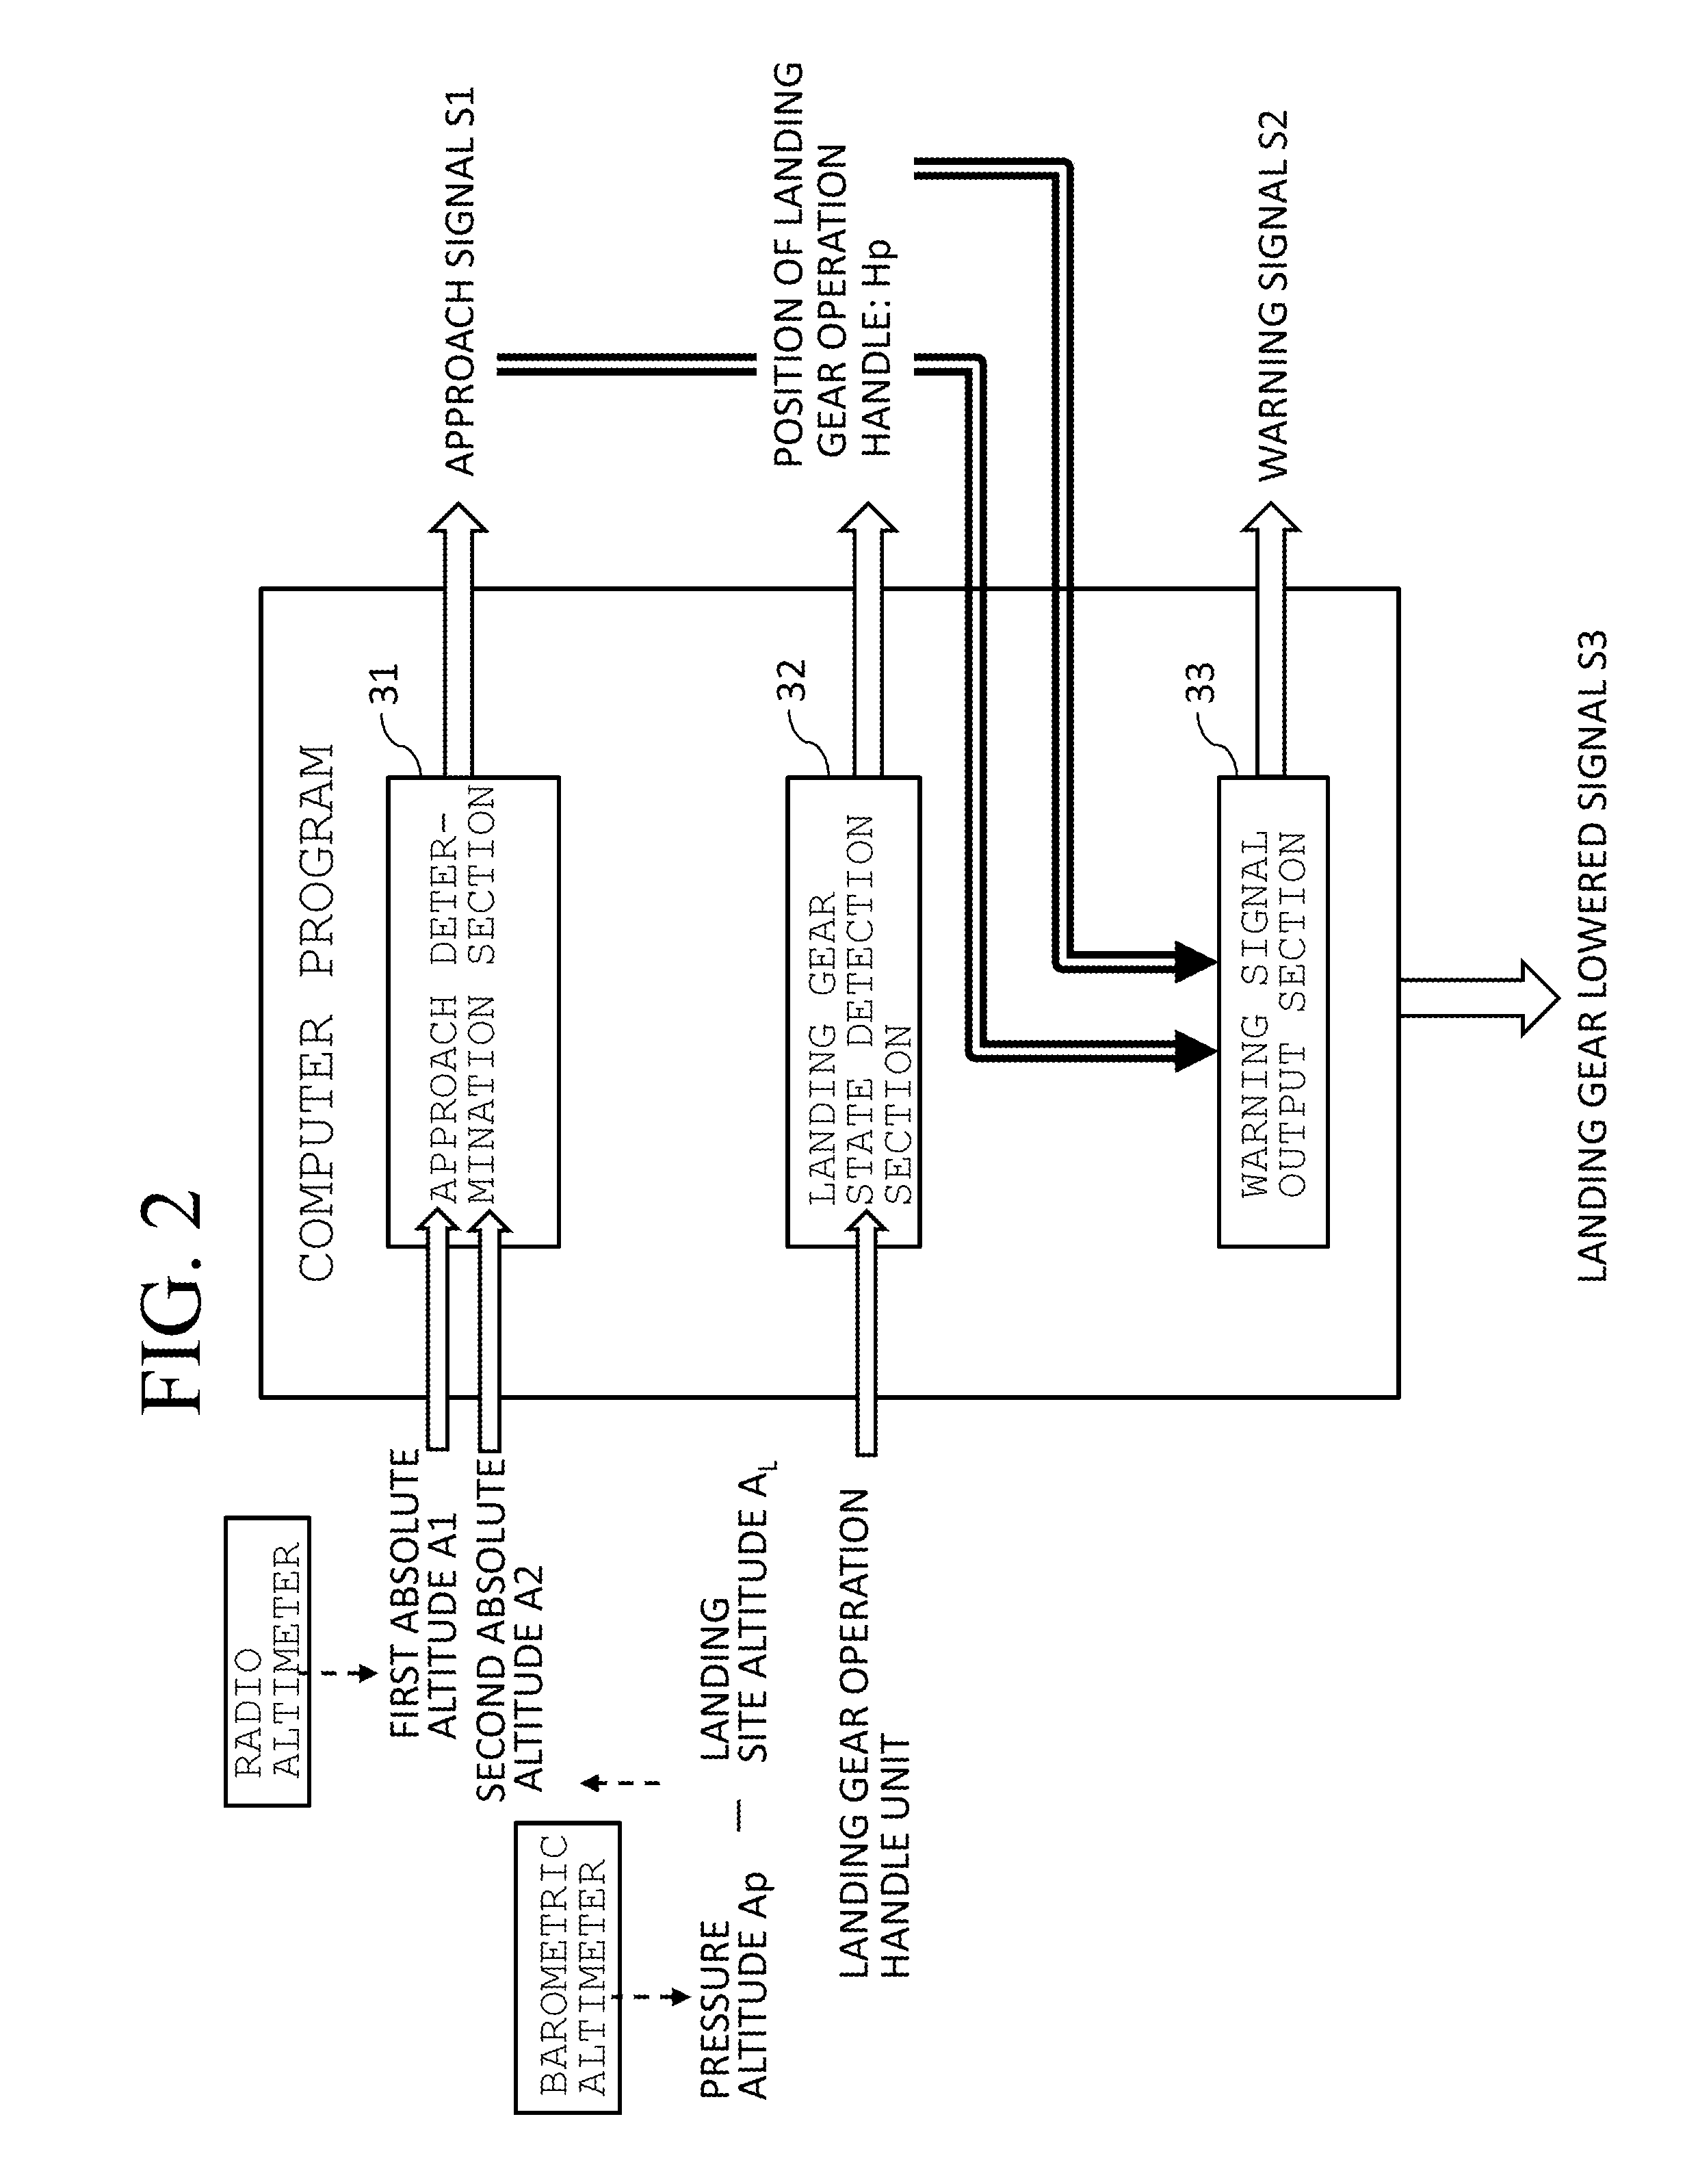 Computer system for determining approach of aircraft and aircraft